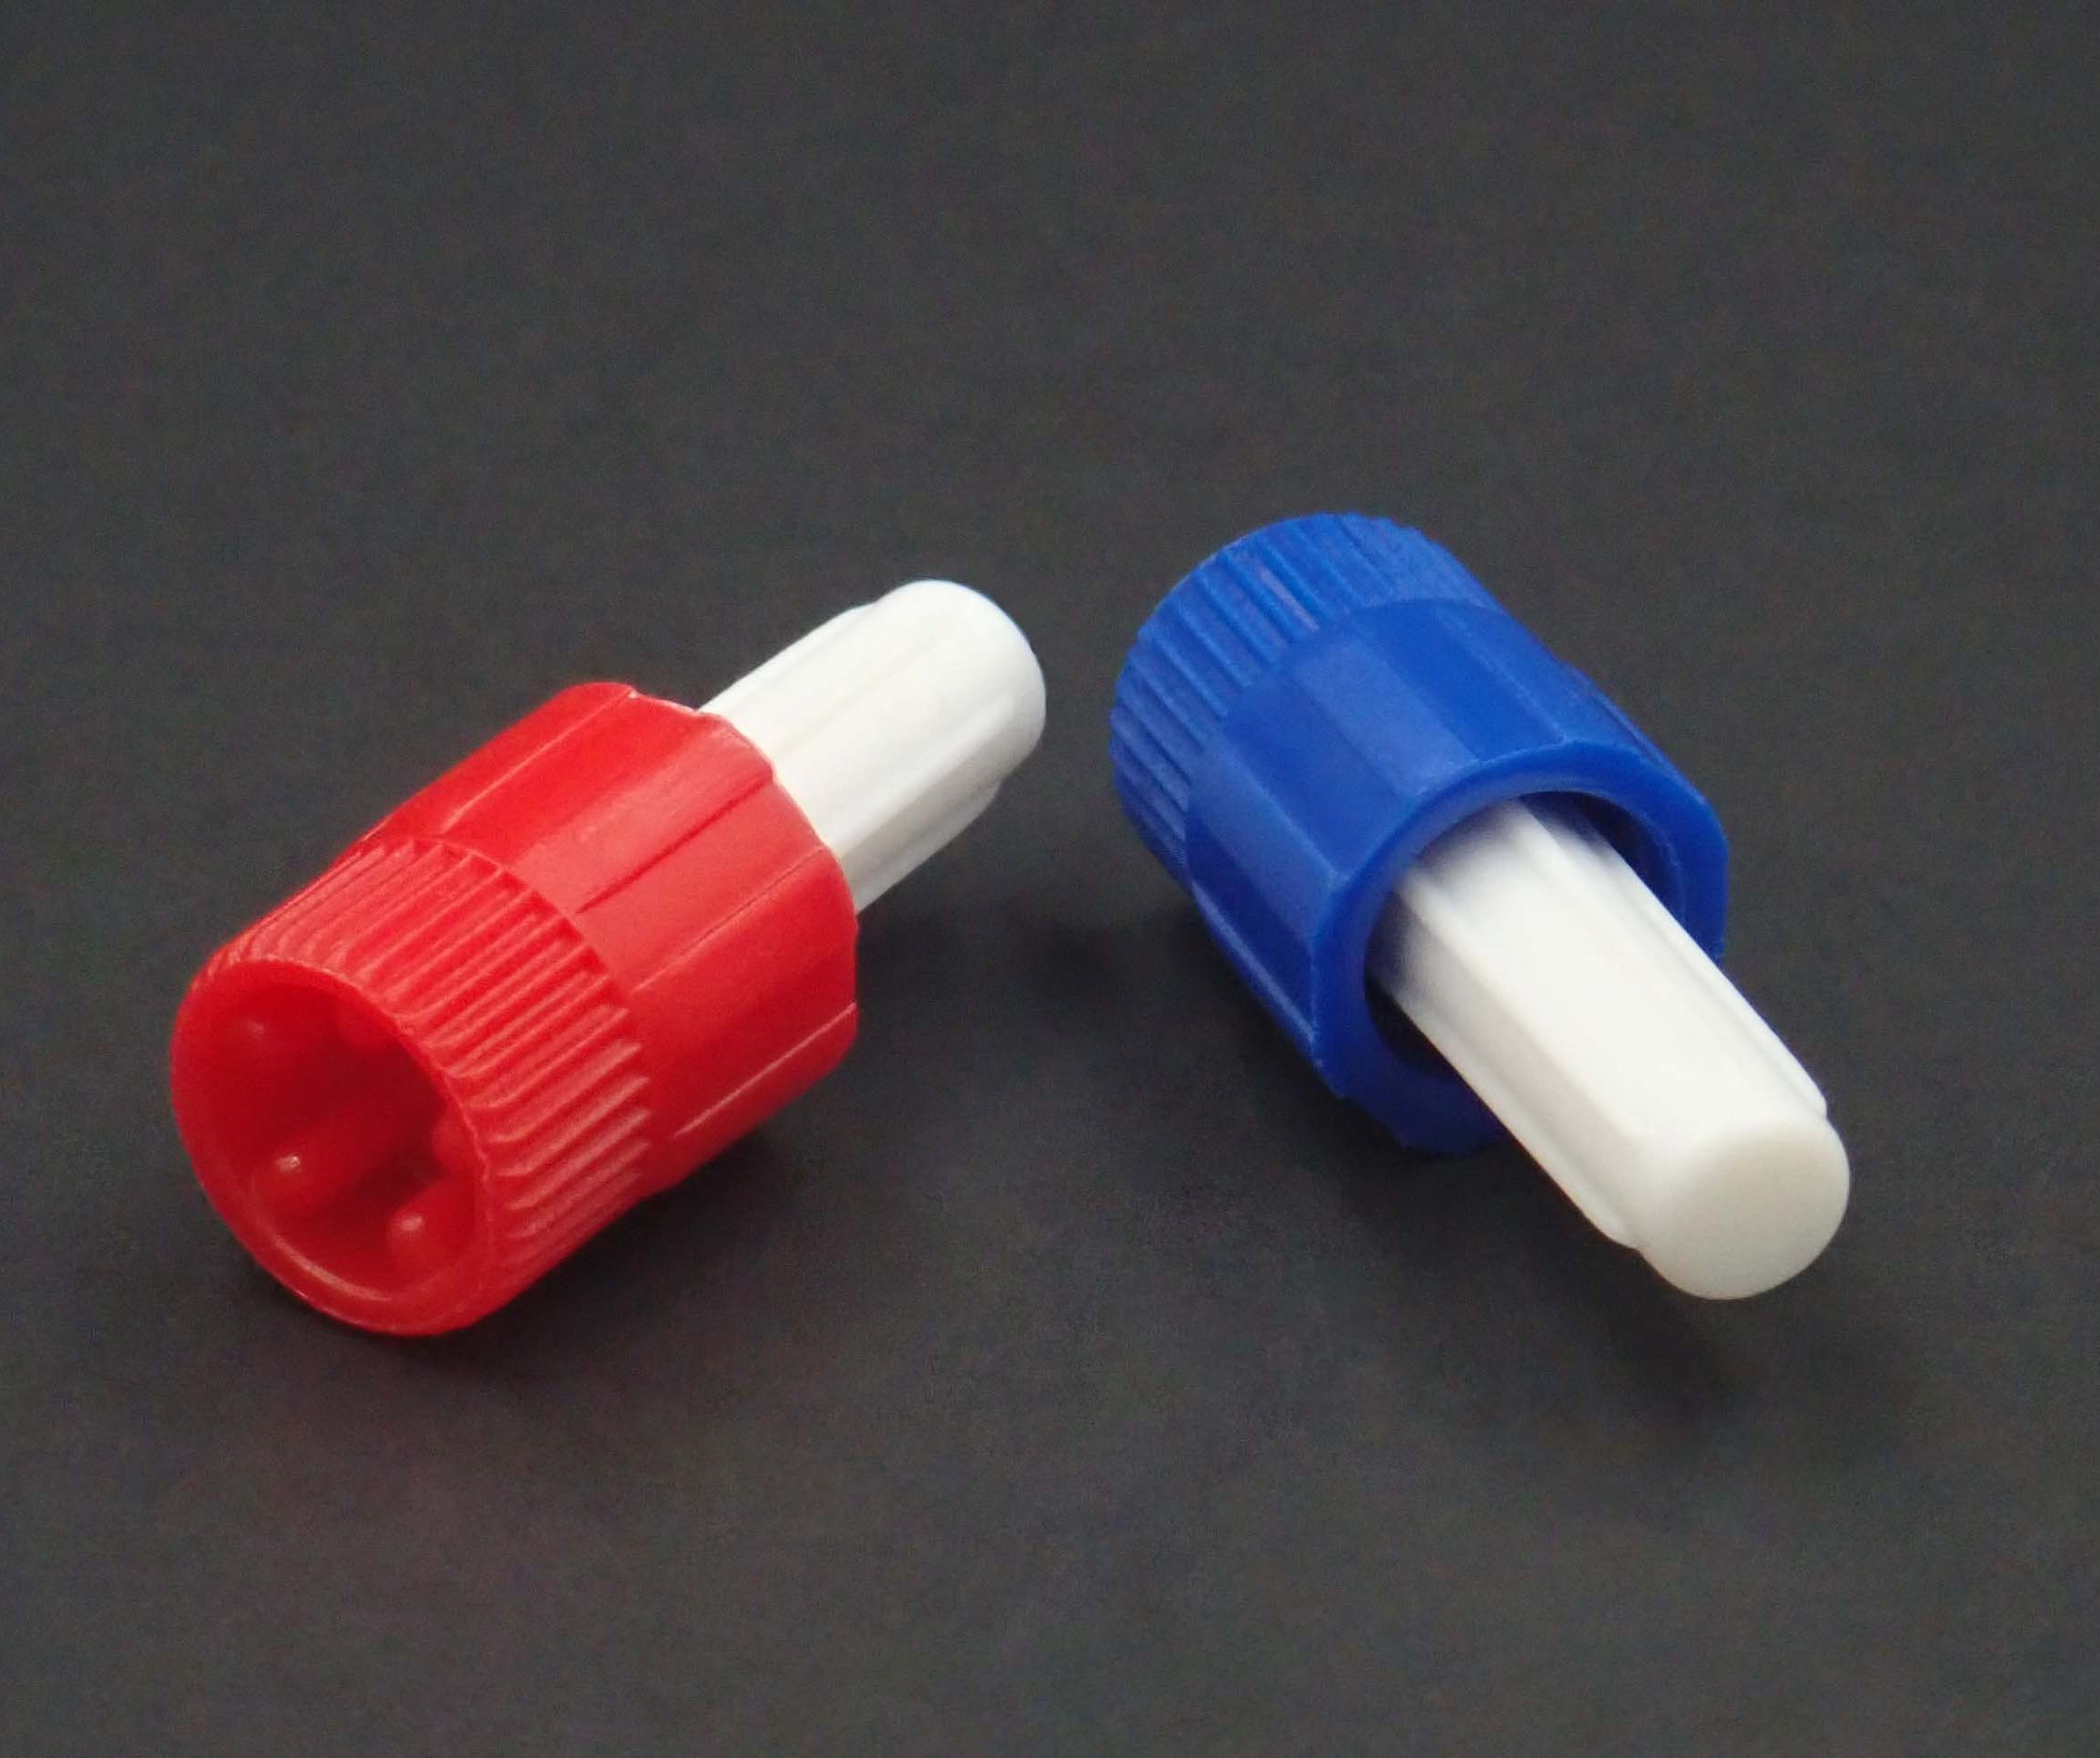 Vycap - Male Luer lock cap - Luer stoppers and connectors